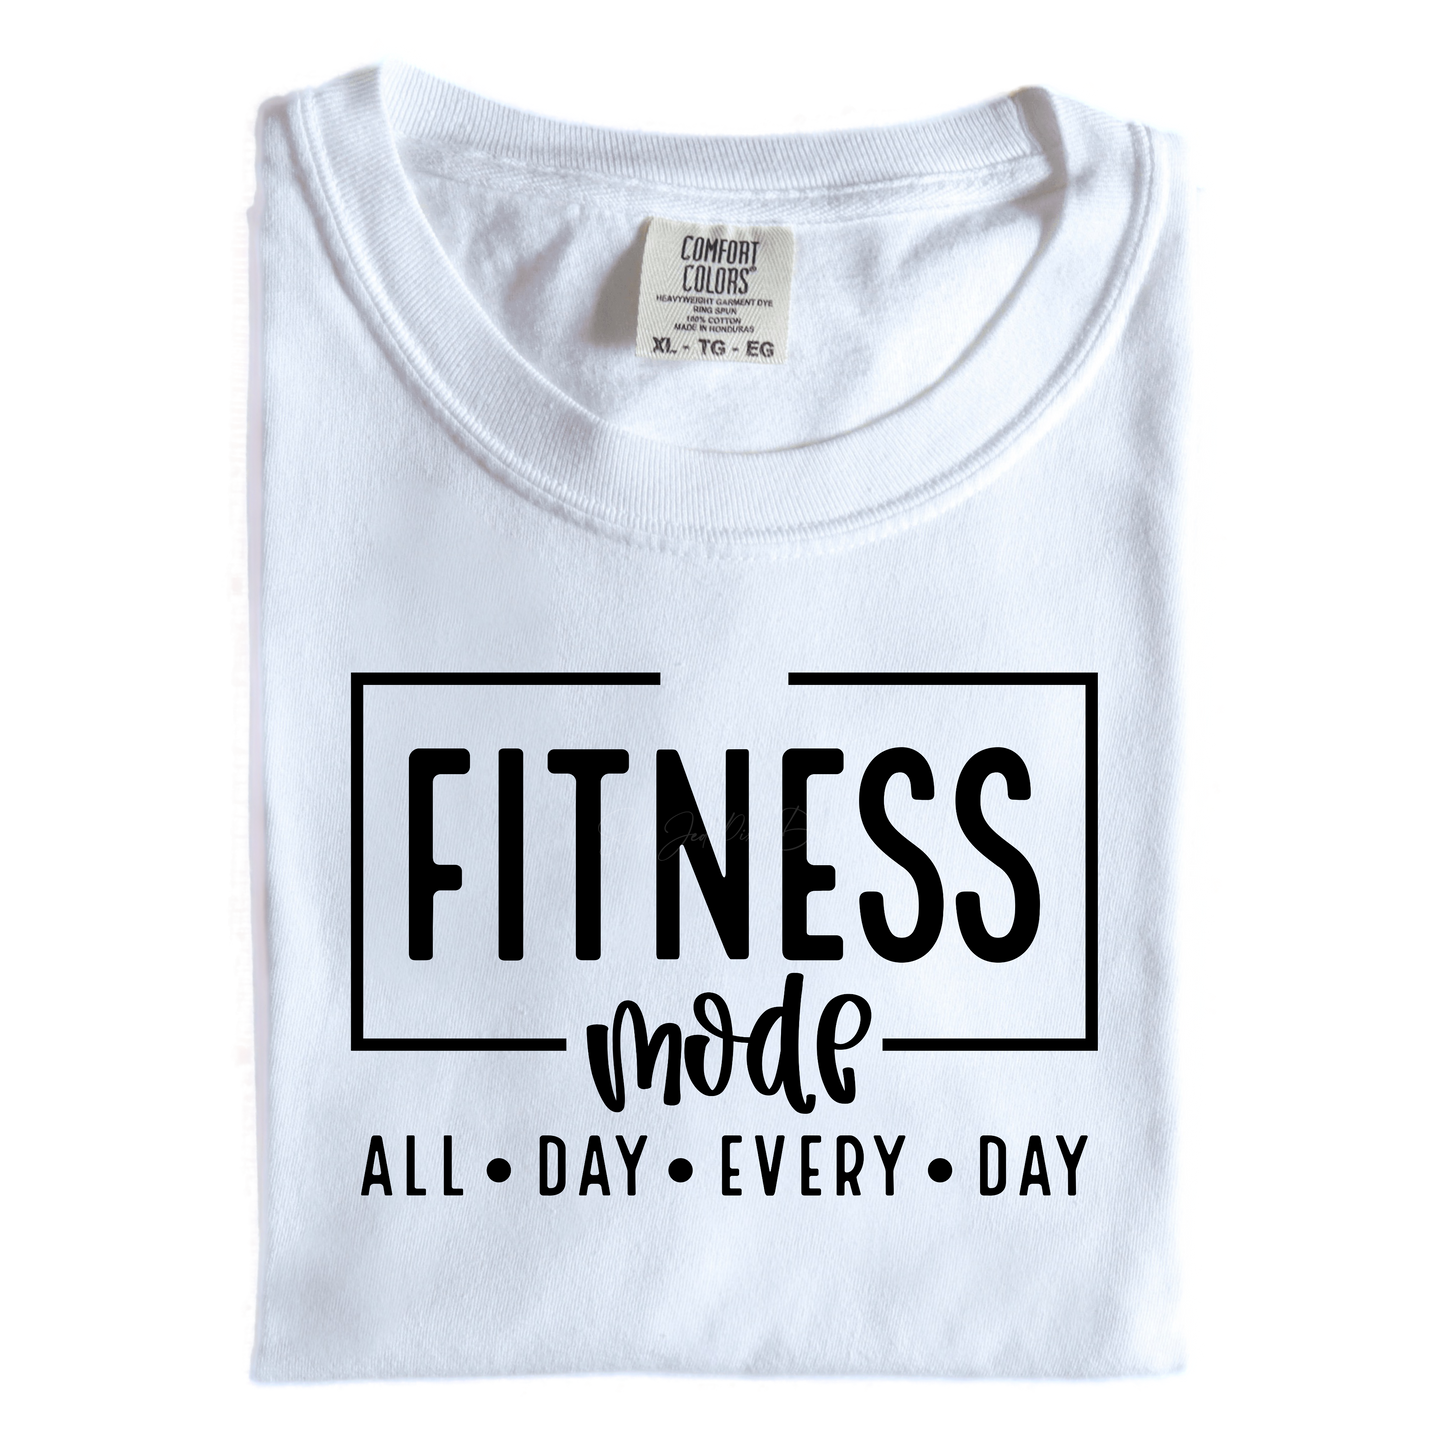 Copy of Fitness: All Day Every Day